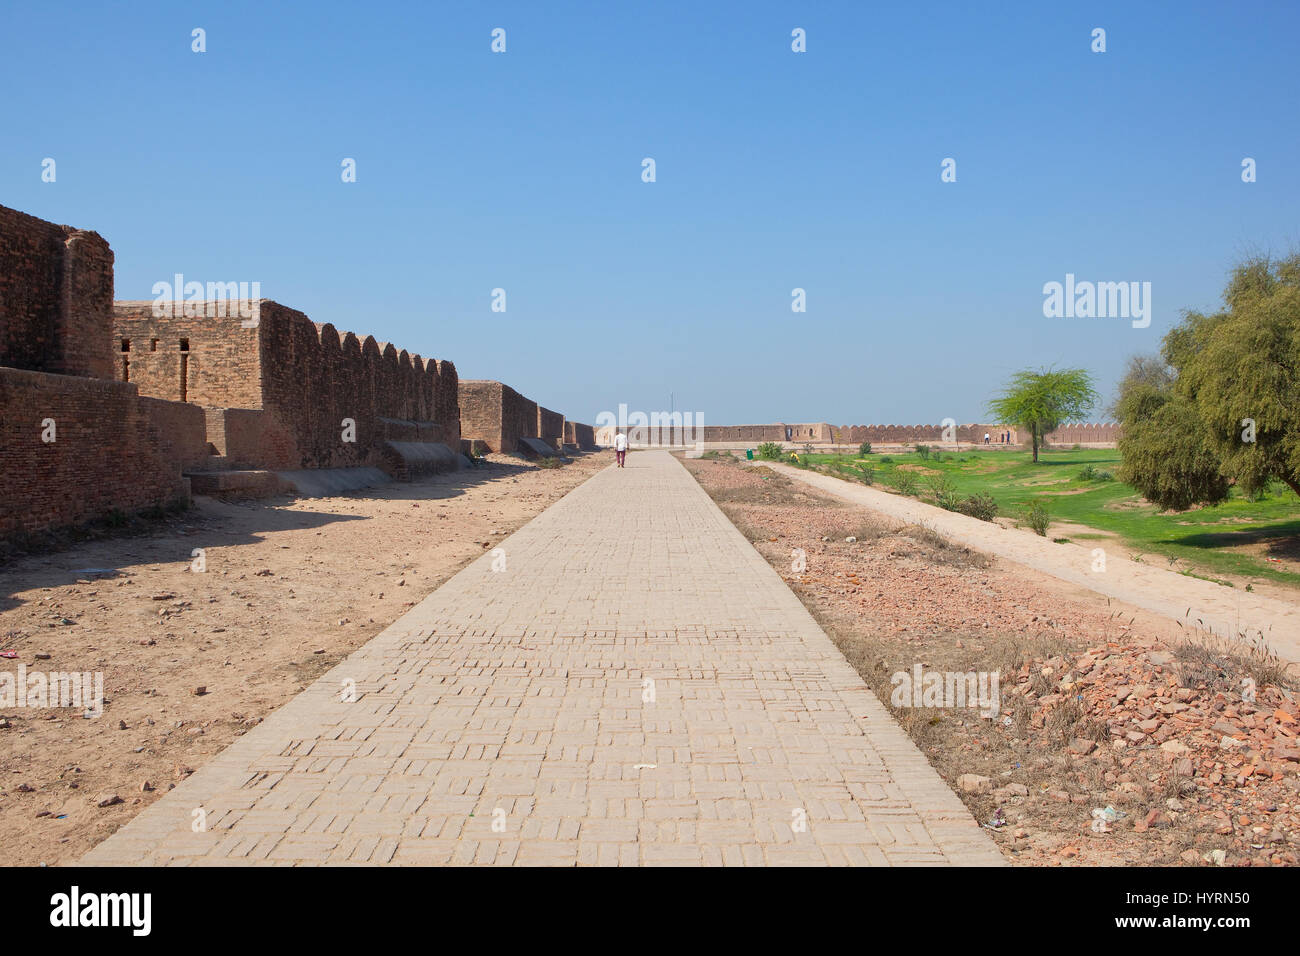 visitors at the historical site of bhatner fort in the town of hanumangarh rajasthan india with restored fort walls and paths under a clear blue sky Stock Photo